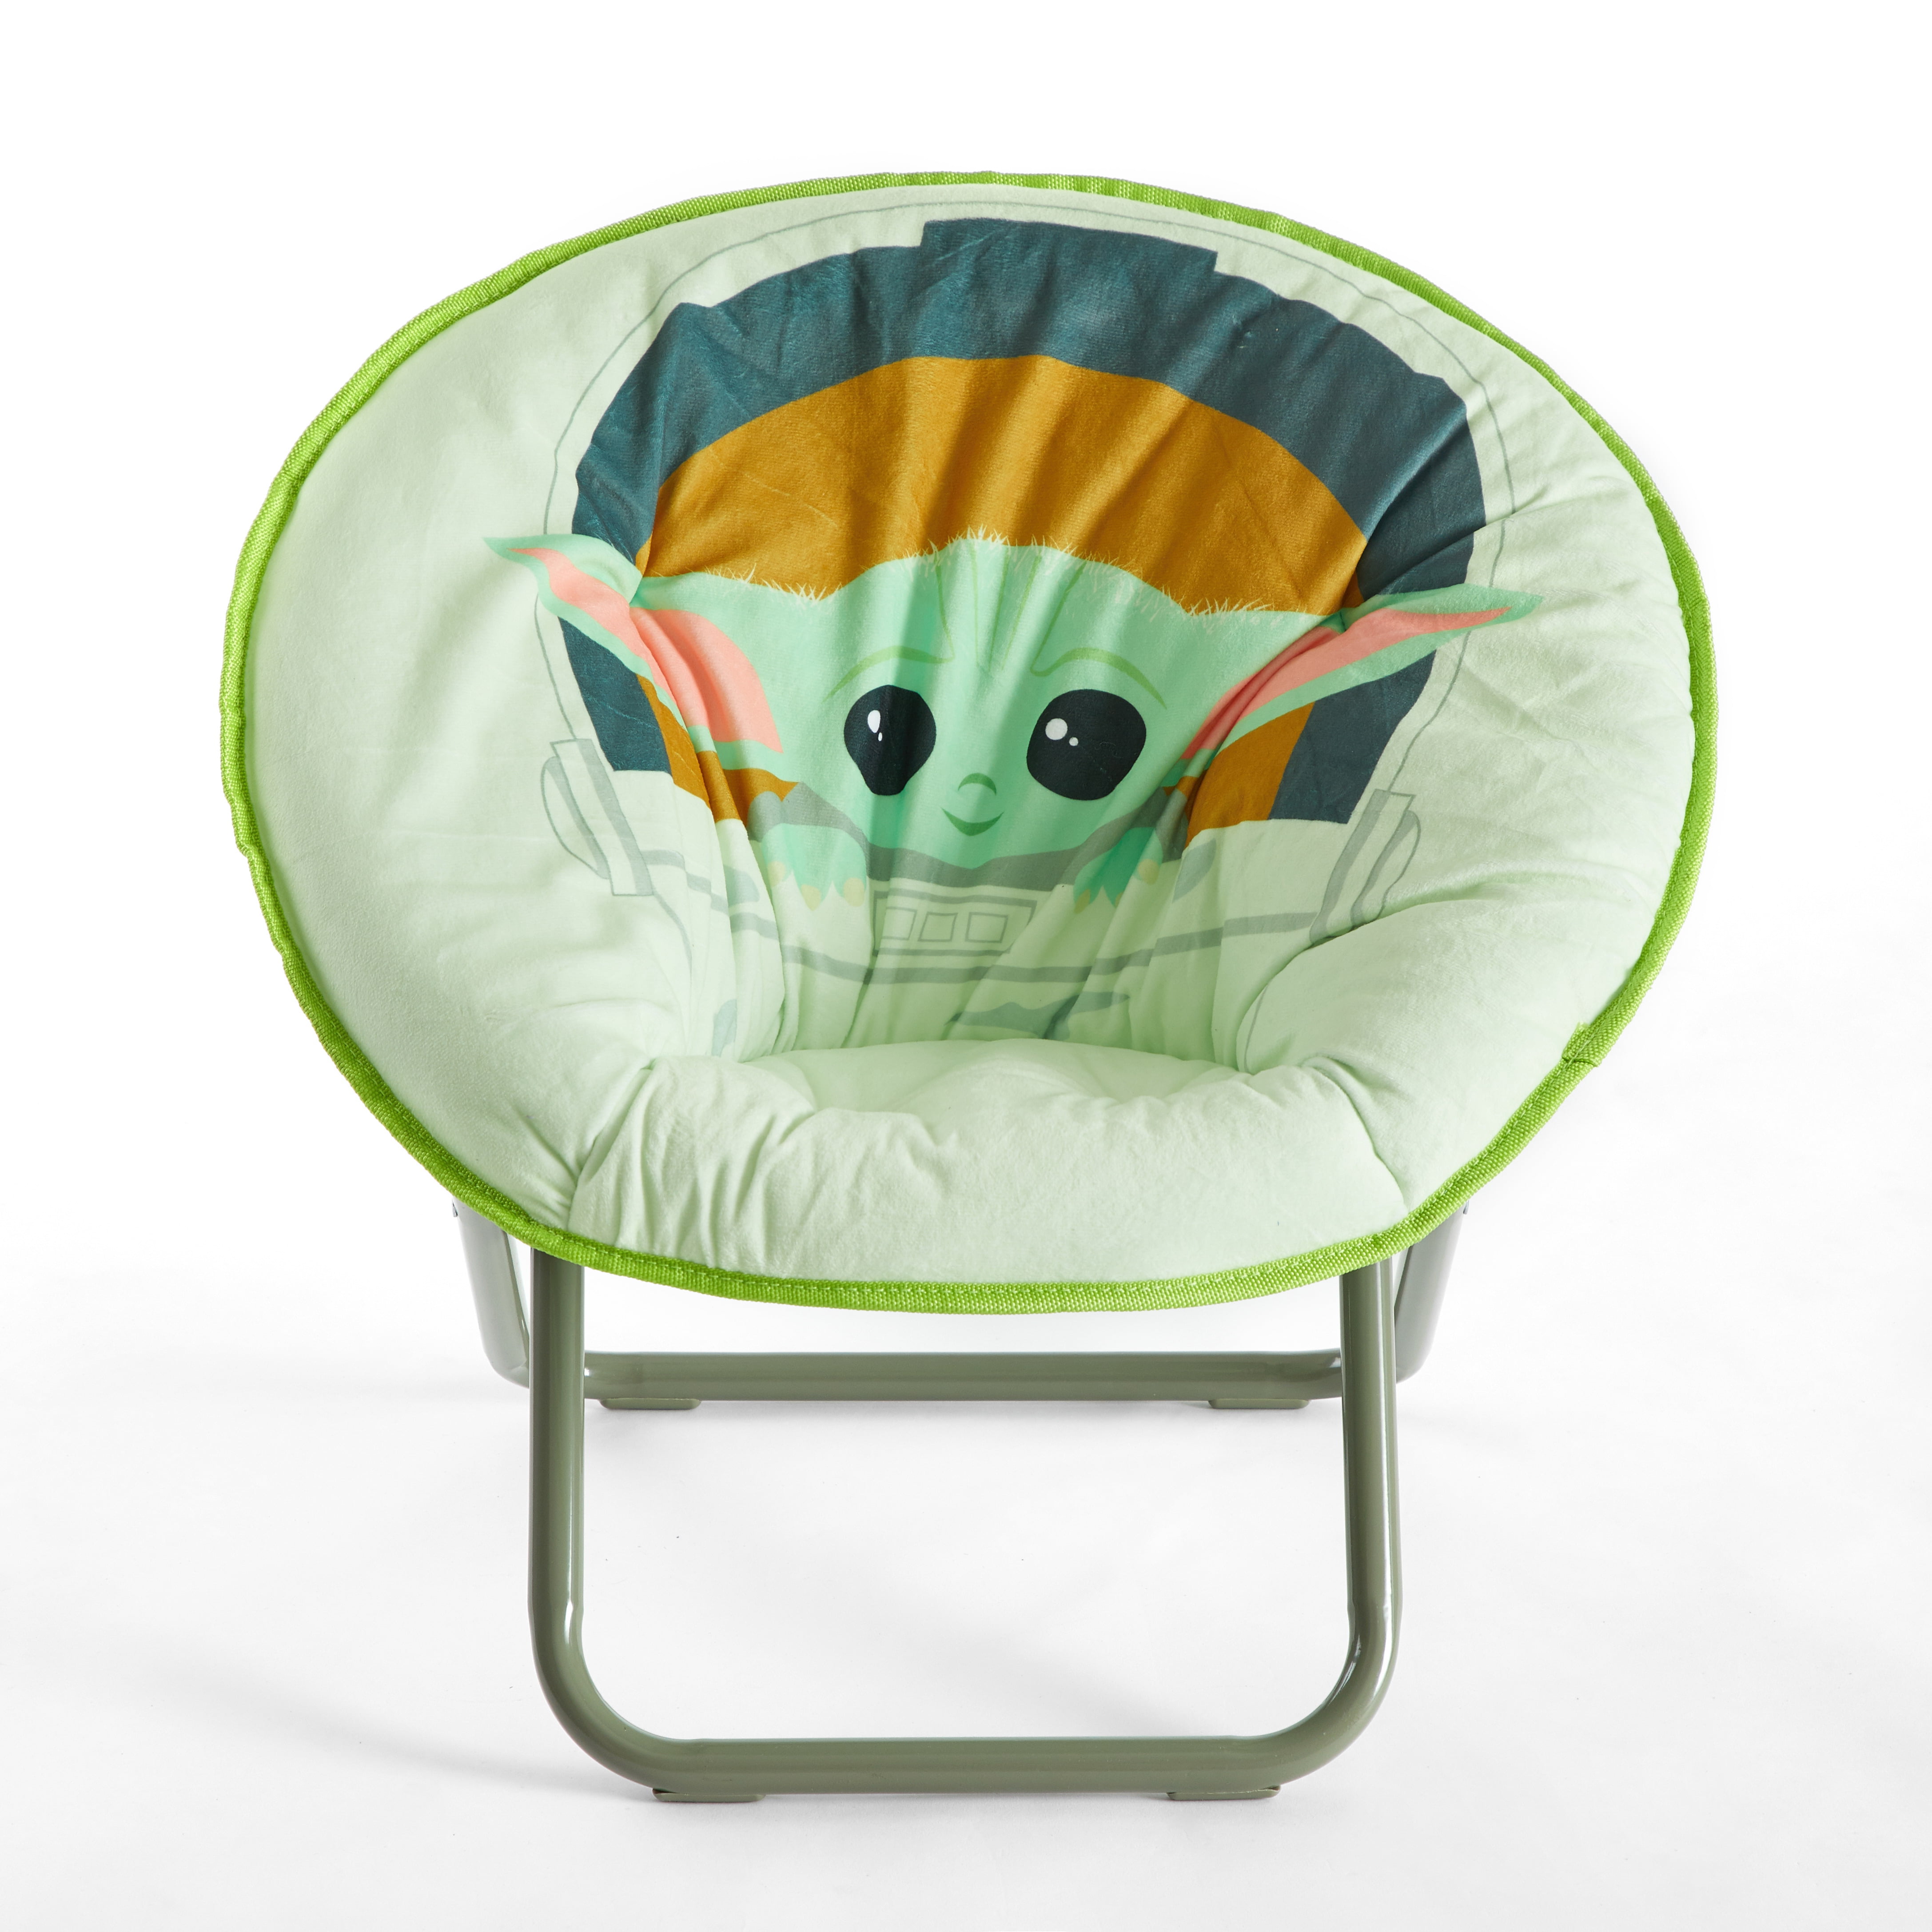 Lucas Baby Yoda 19in Soft Mink Green Saucer Chair with a Polyester Cushion for Children's Room Décor